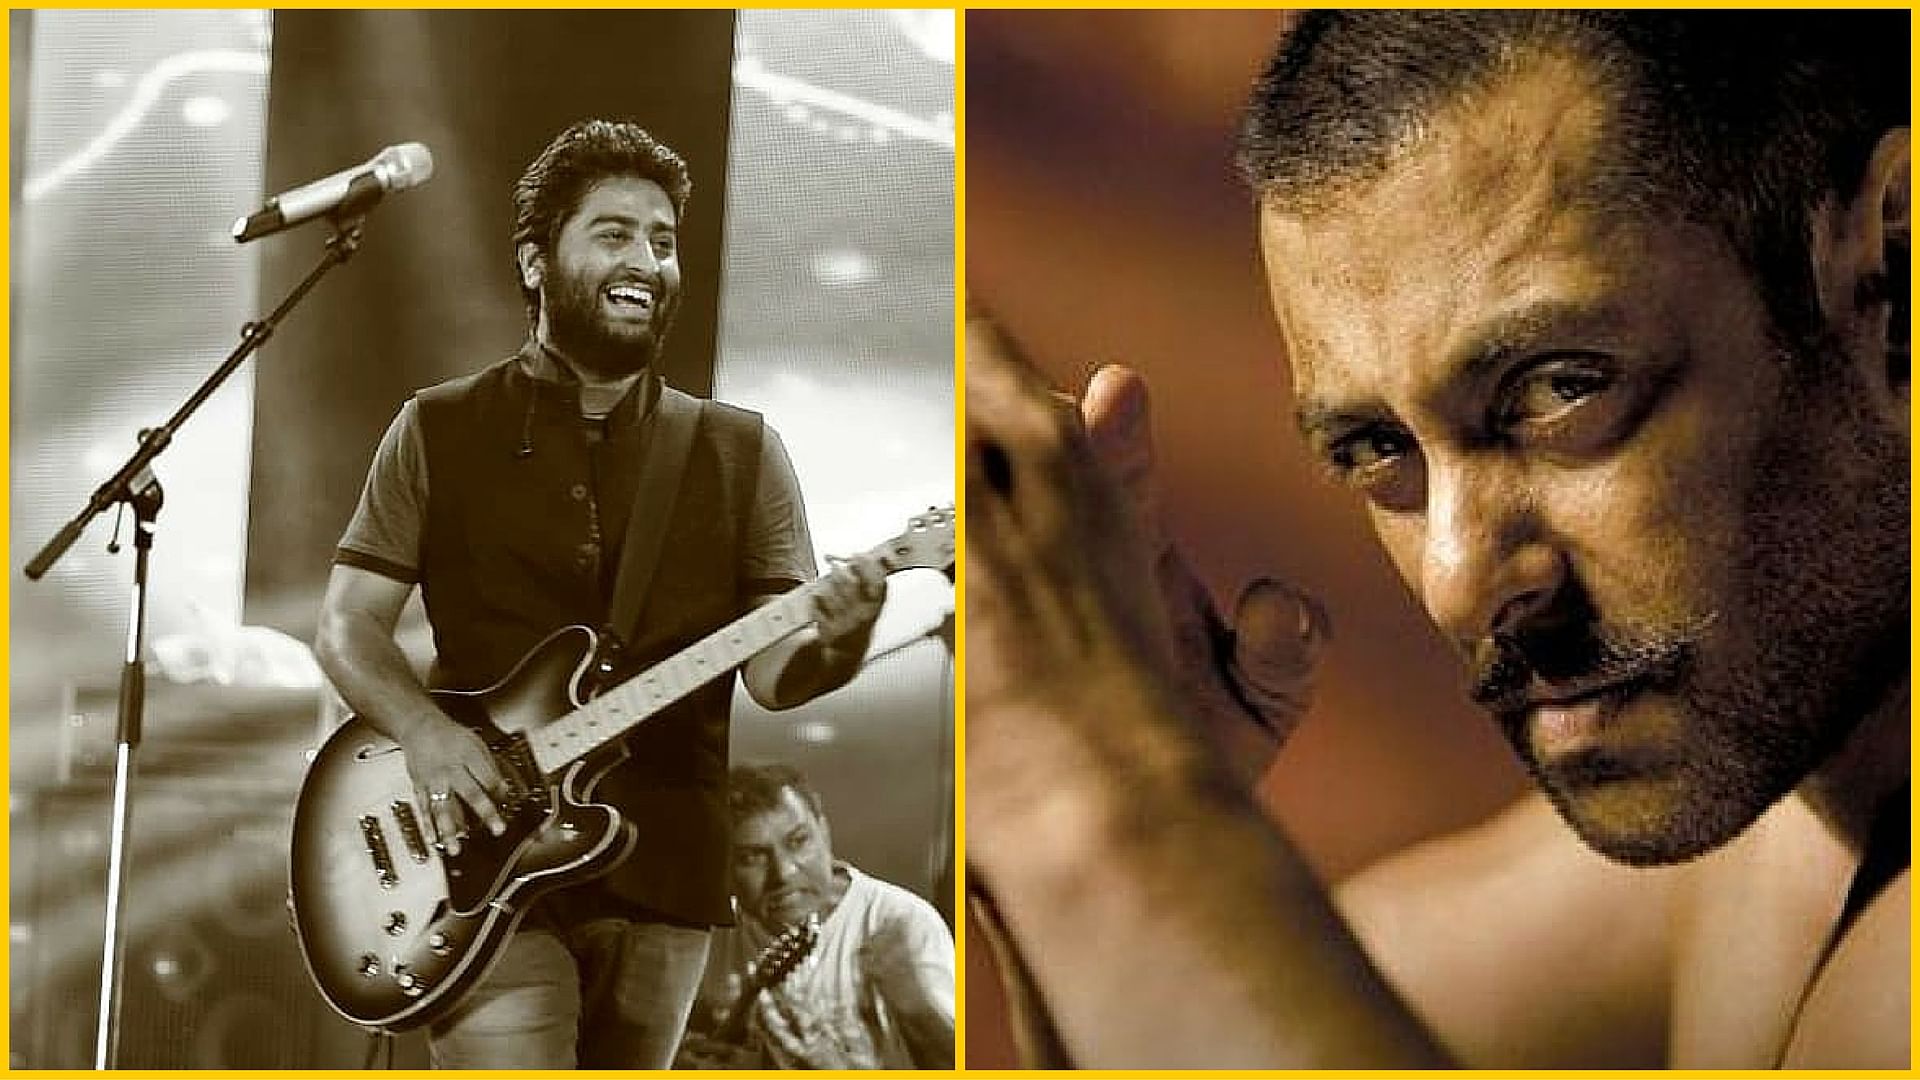 Playback singer Arijit Singh (Photo: Facebook/@Arijit Singh) and Salman Khan in a still from <i>Sultan </i>